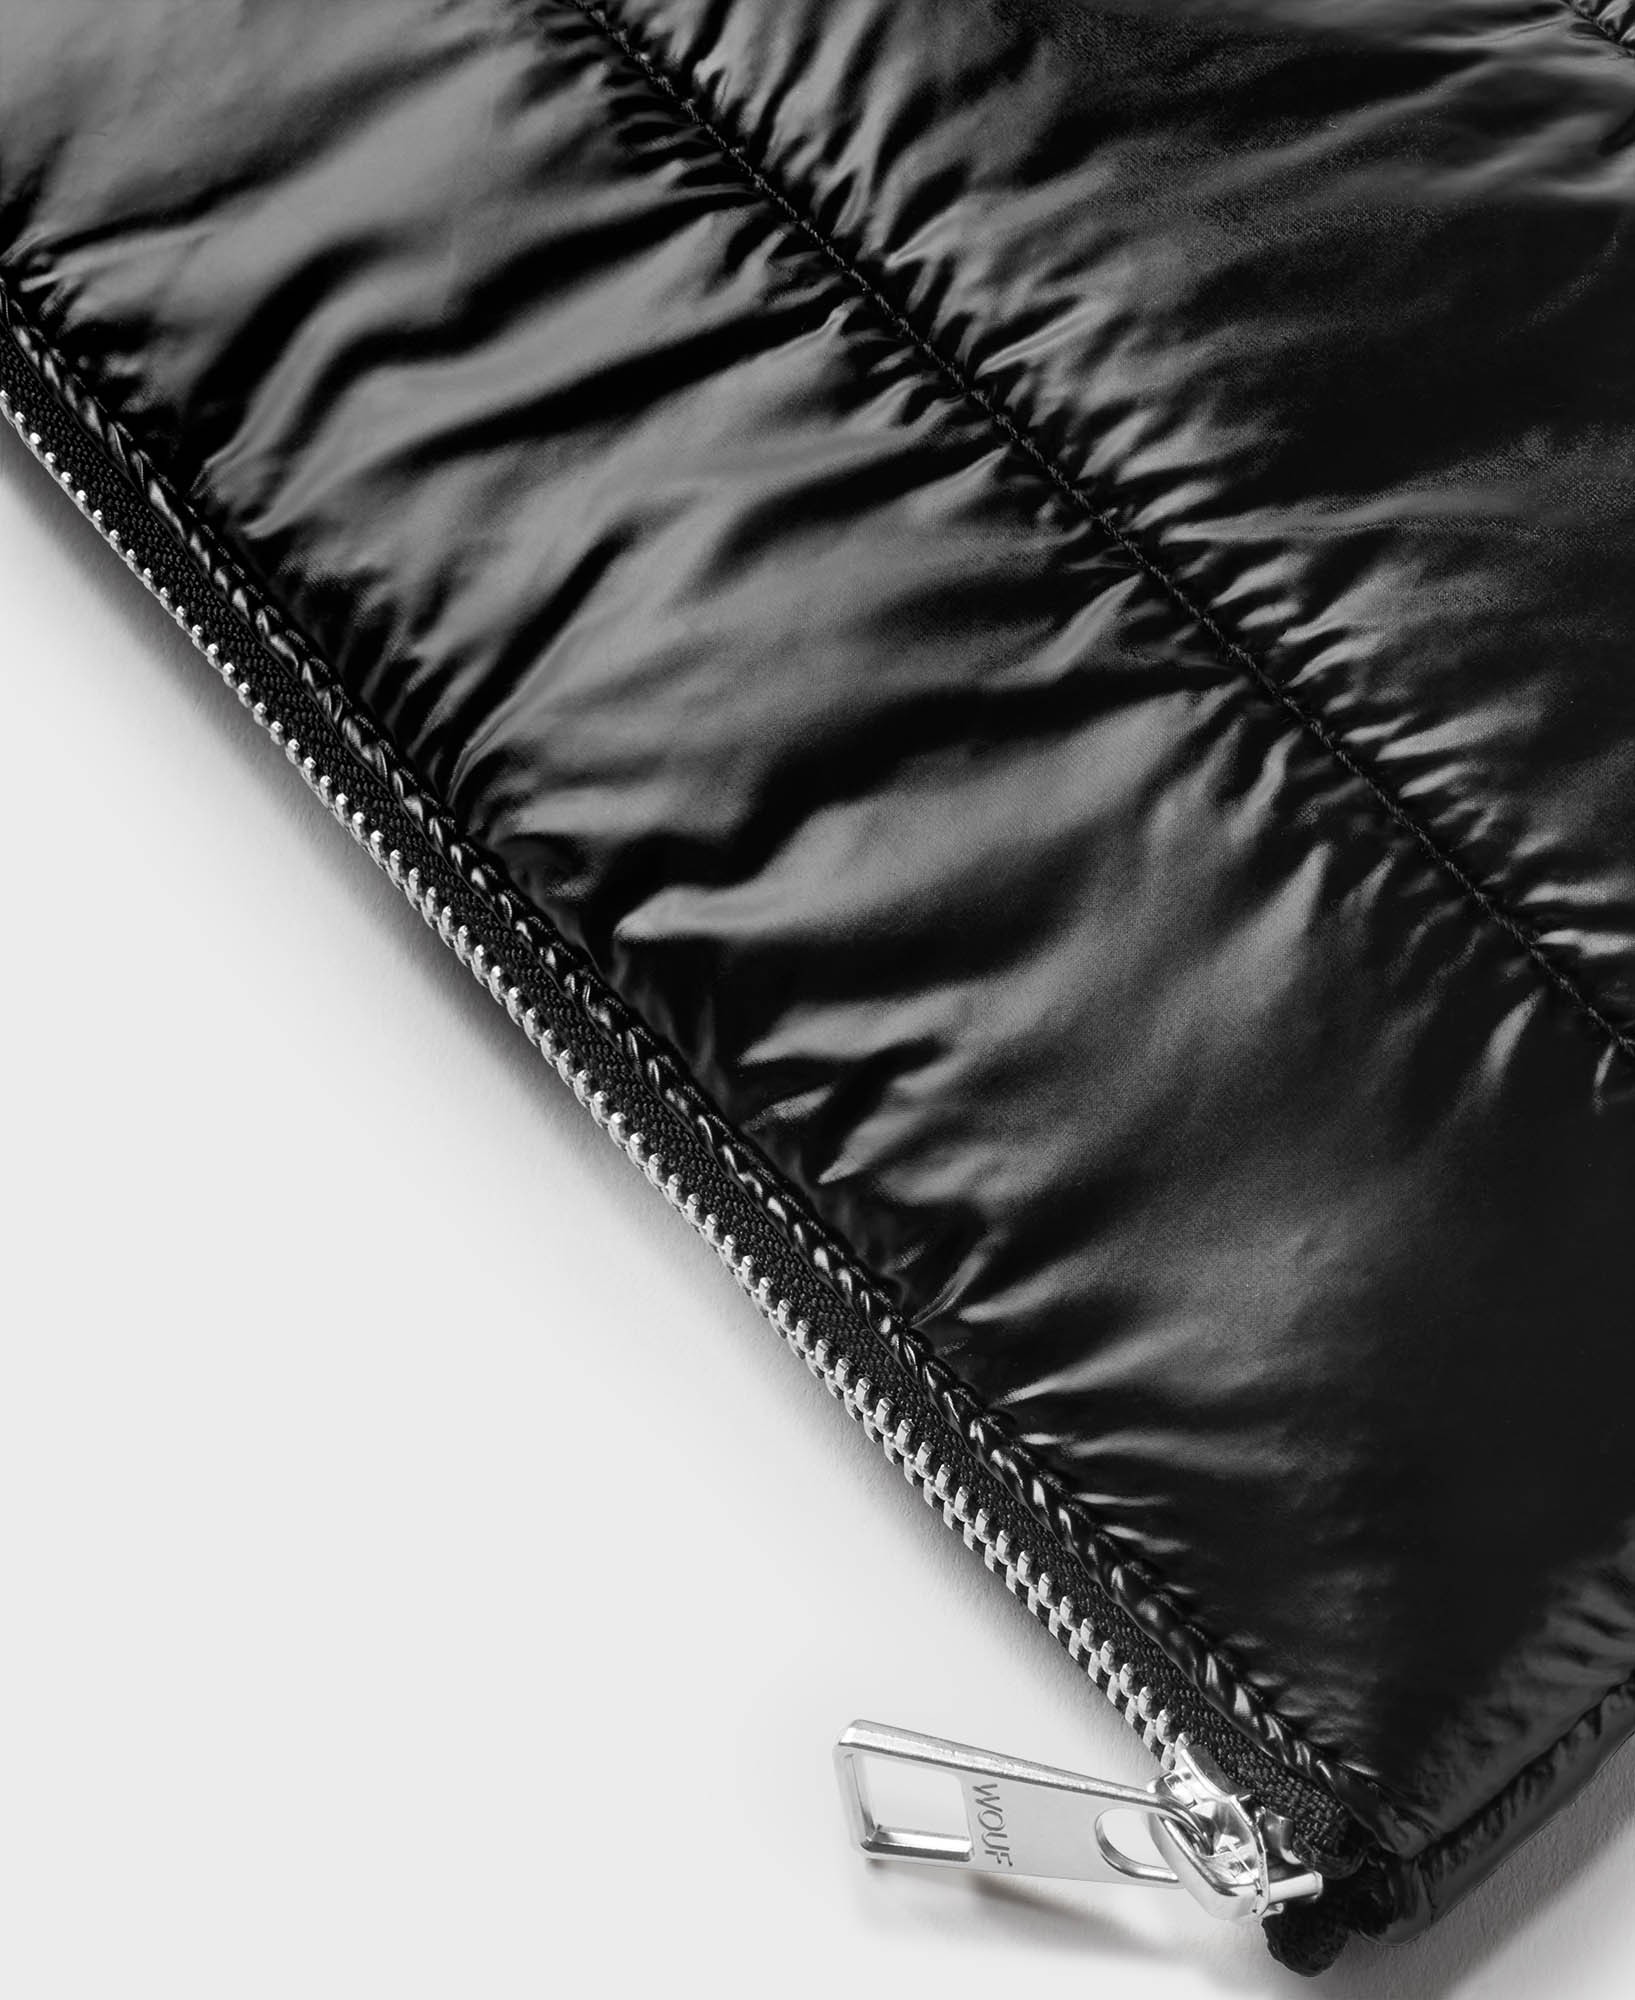 Black Glossy Pouch